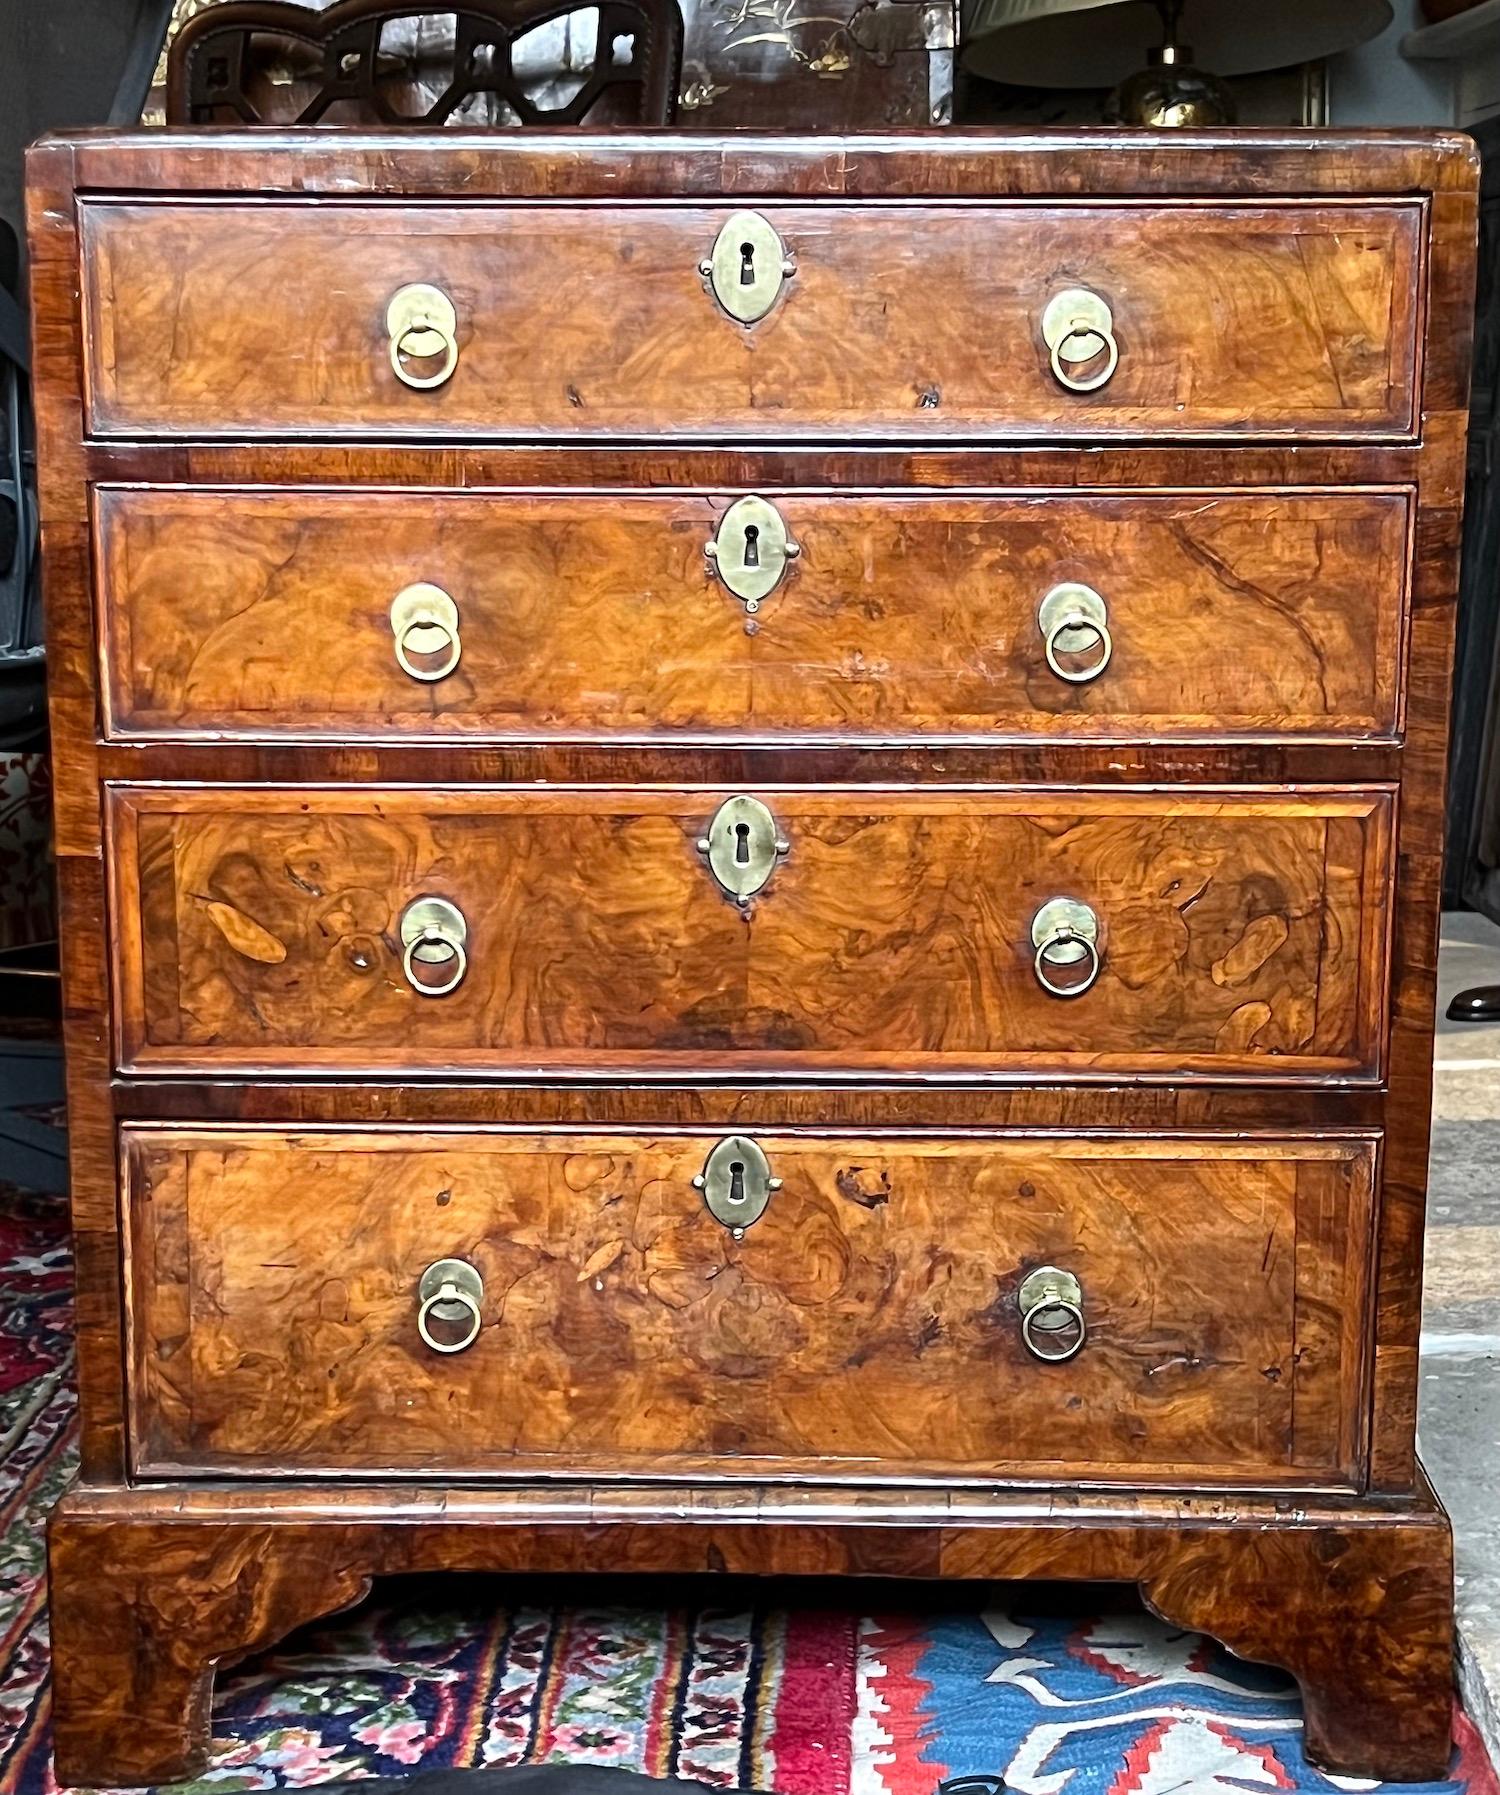 A George I period burr walnut chest of rare small proportions. Circa 1720.

This rare English early-18th century caddy-top chest retains good rich colour and patina.

Four graduated cockbeaded, oak-lined working drawers. Brasses original.
In